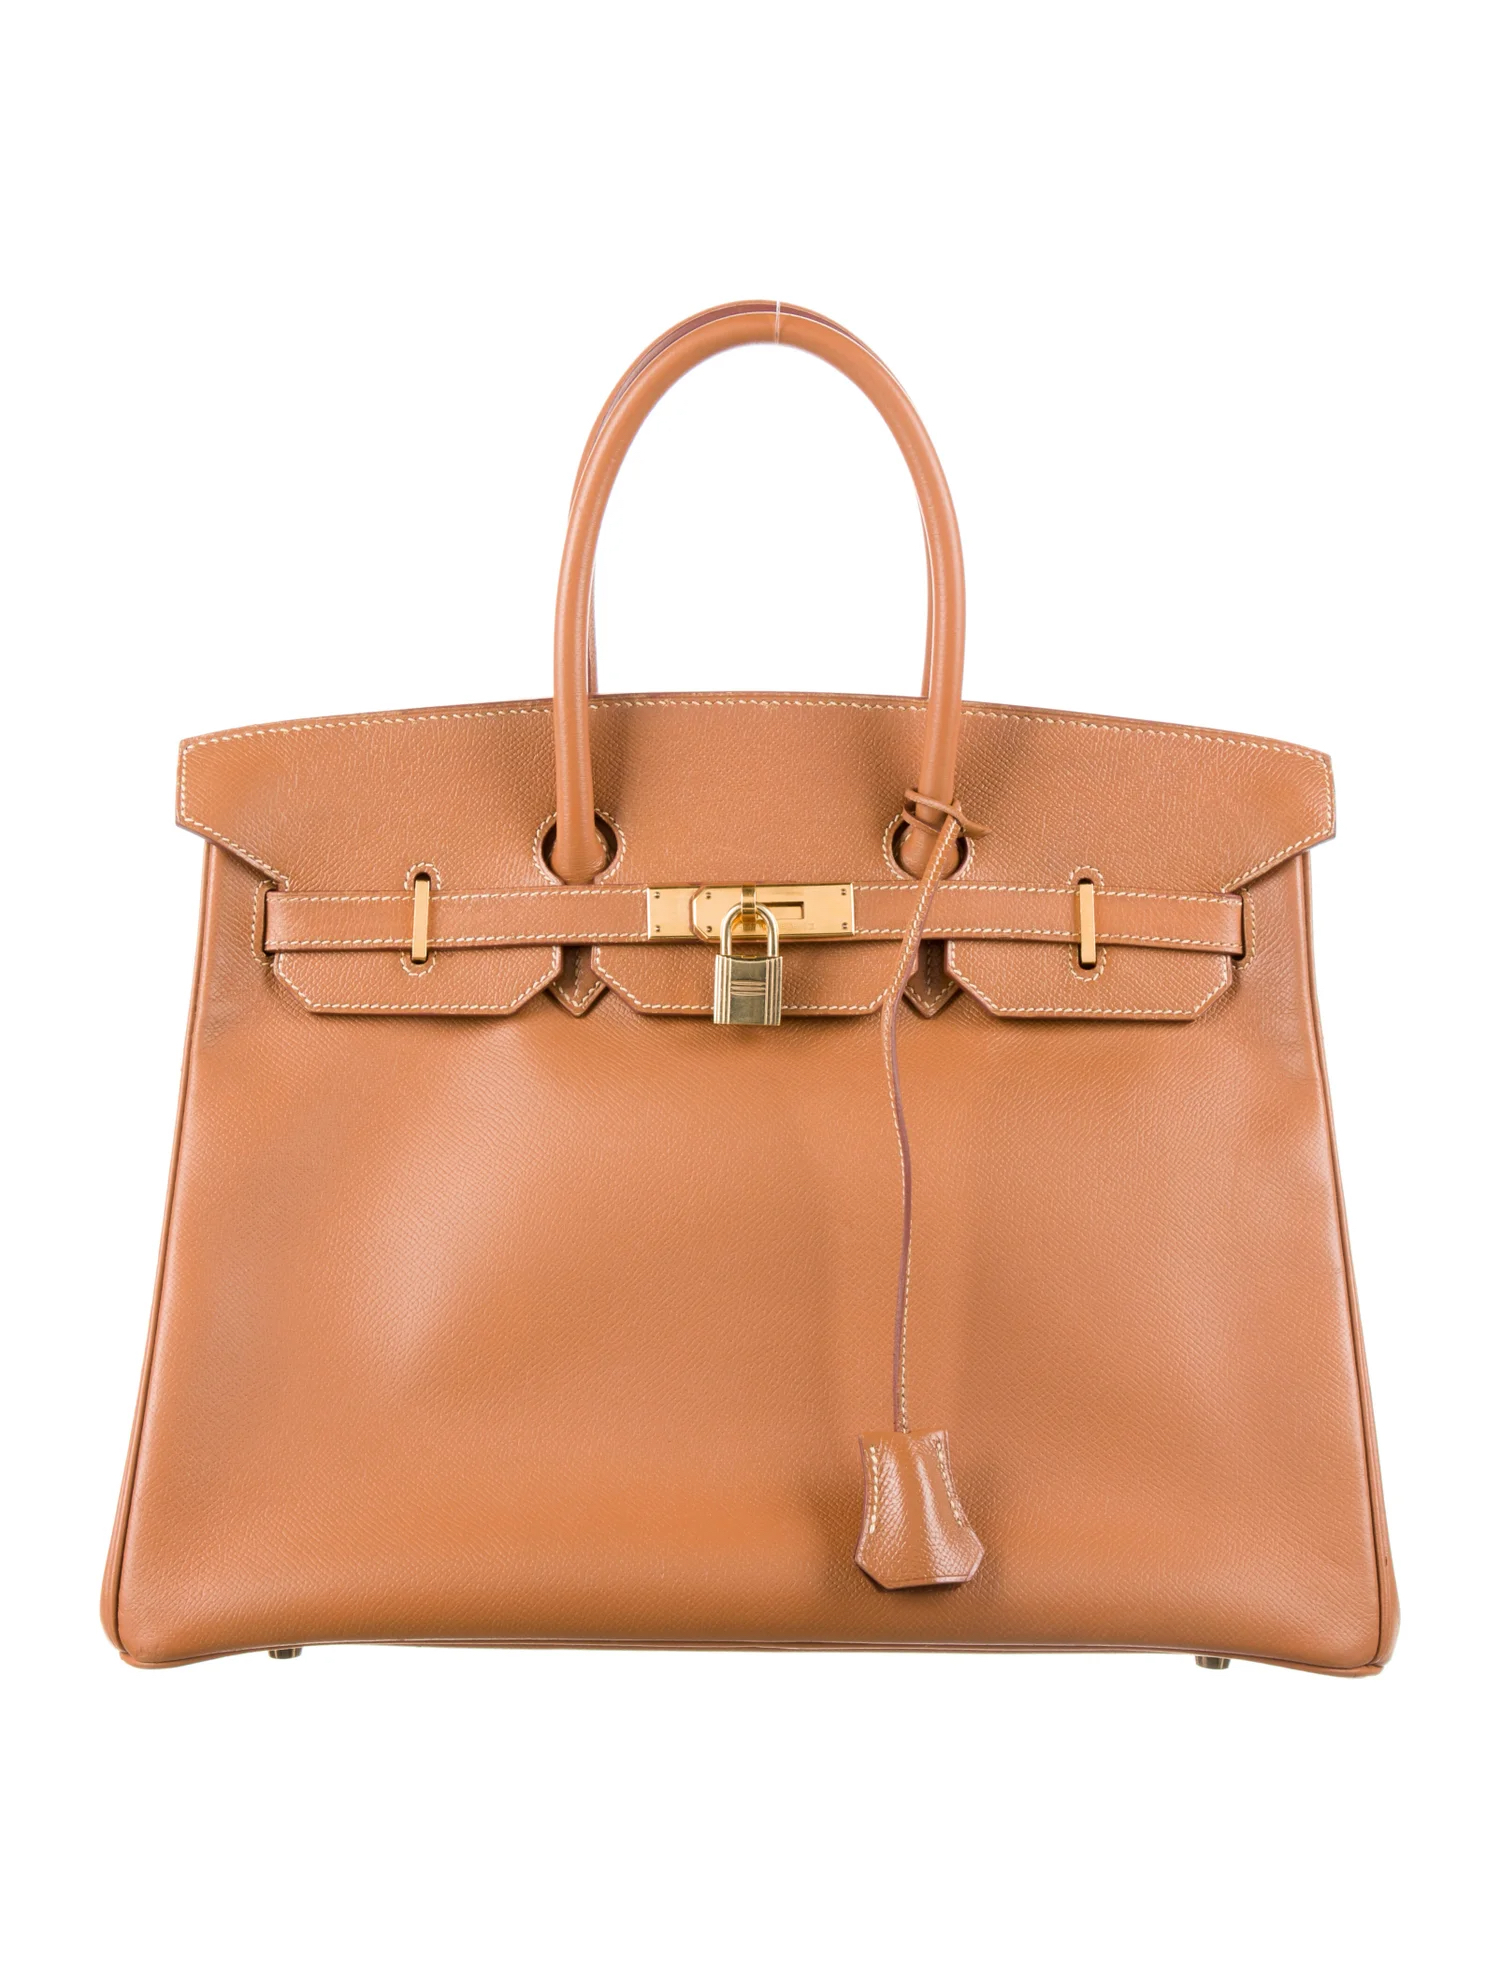 30 Vintage Hermès Bags That Are Foolproof Investments